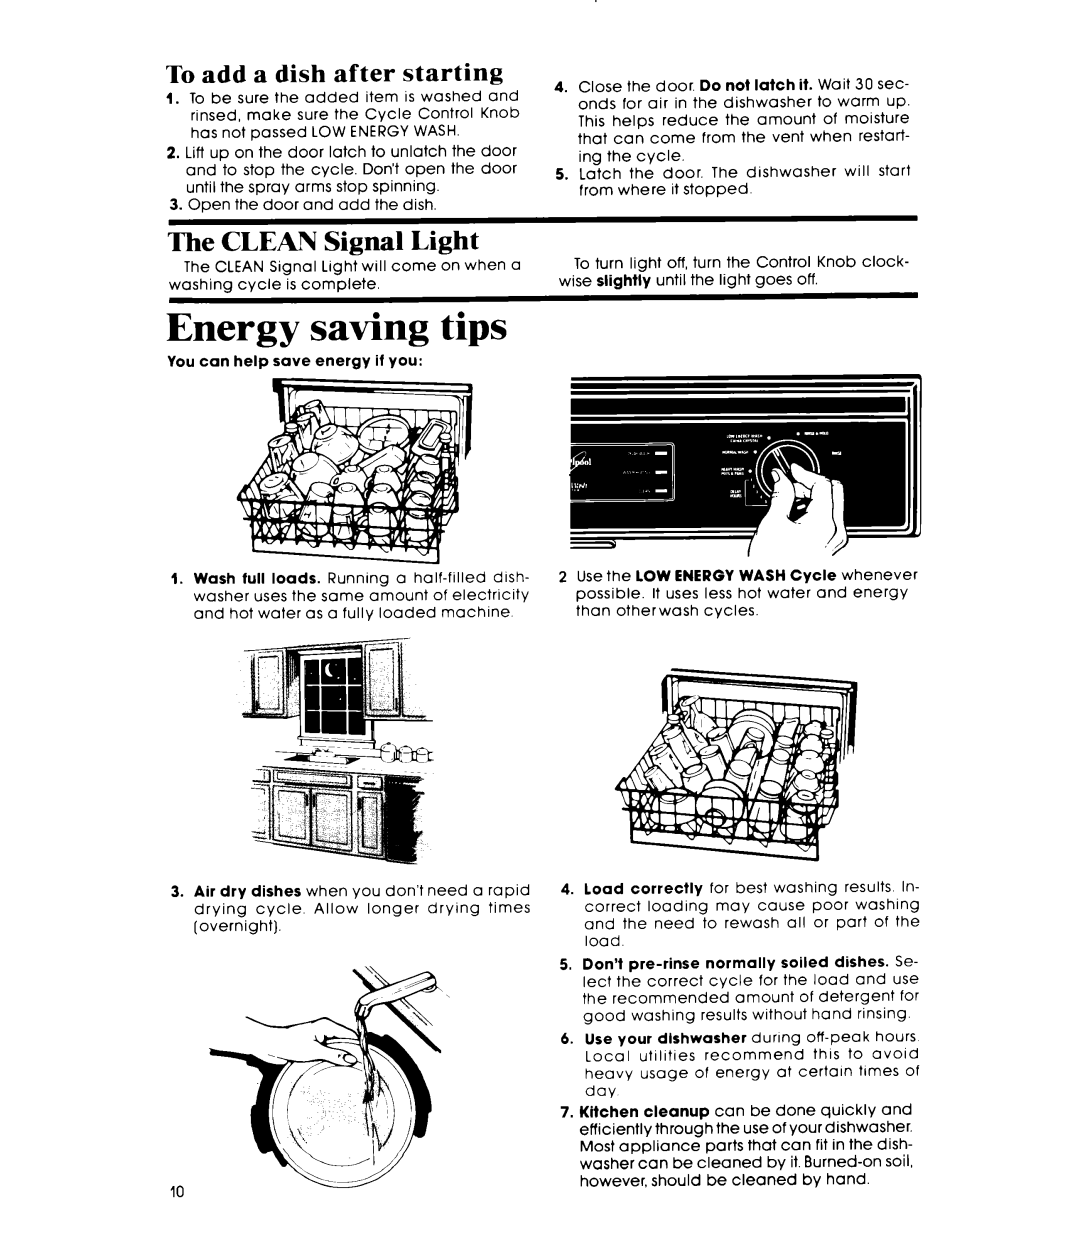 Whirlpool DU8900XT manual The CLEAN Signal Light, Energy saving tips, To add a dish after starting 